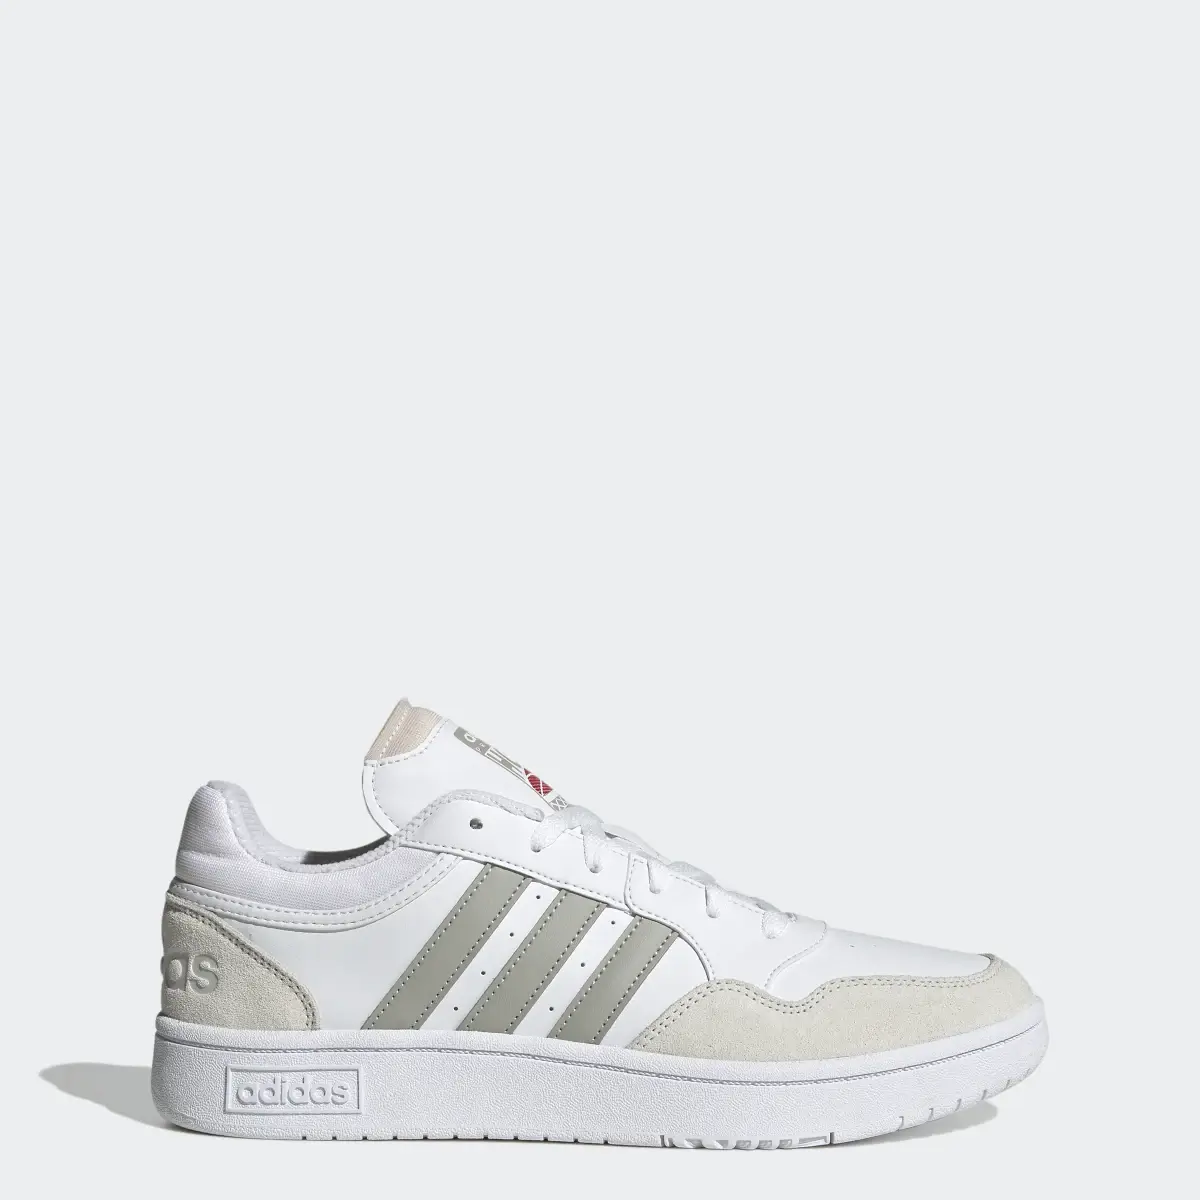 Adidas Hoops 3.0 Lifestyle Basketball Low Classic Vintage Shoes. 1